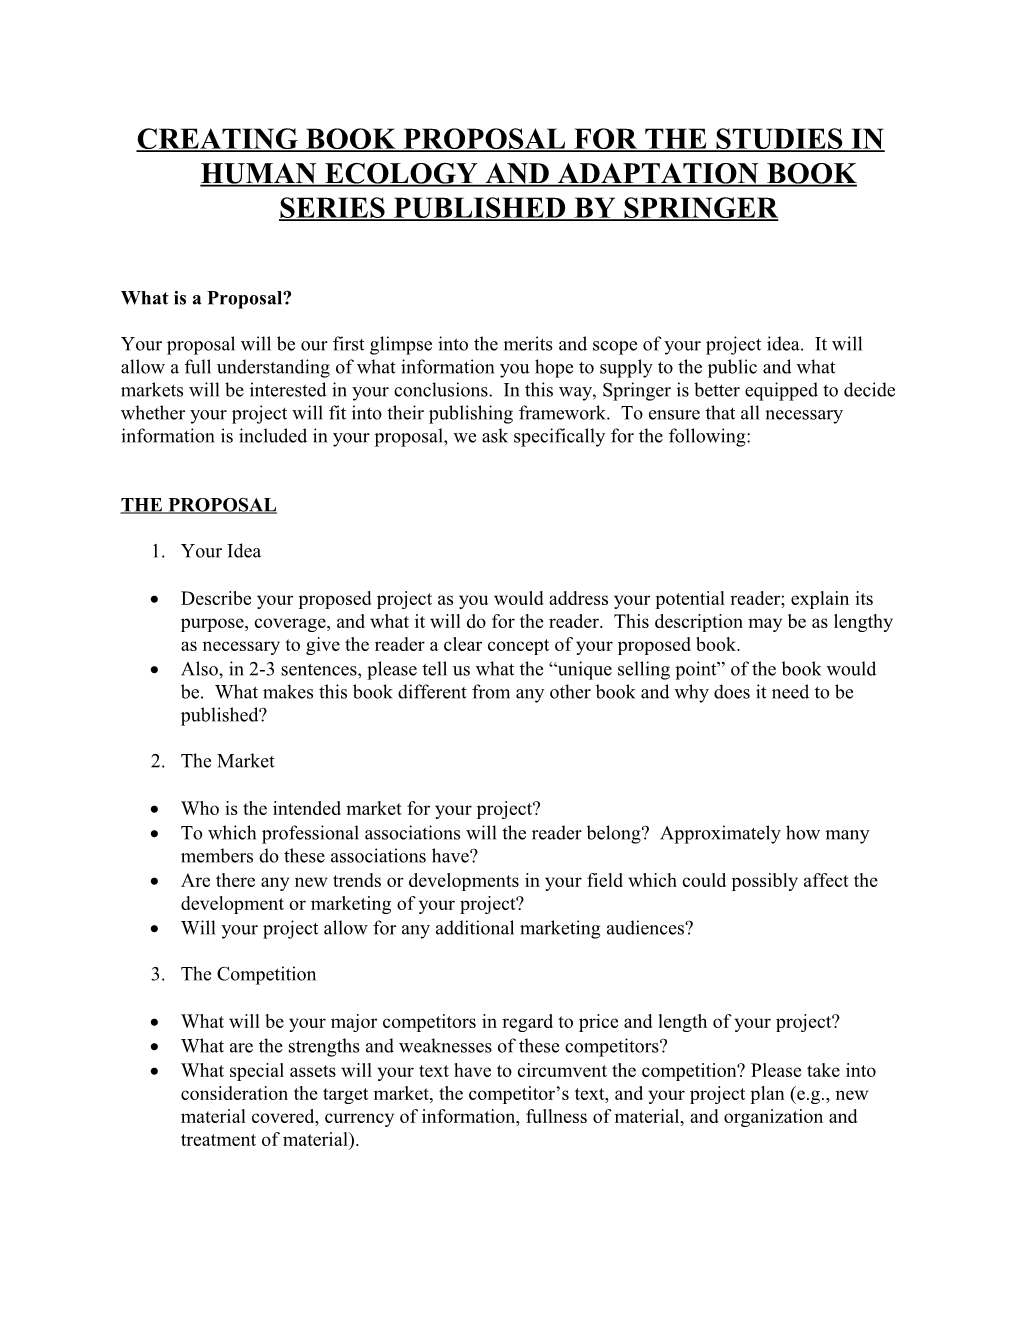 Creating Book Proposal for the Studies in Human Ecology and Adaptation Book Series Published